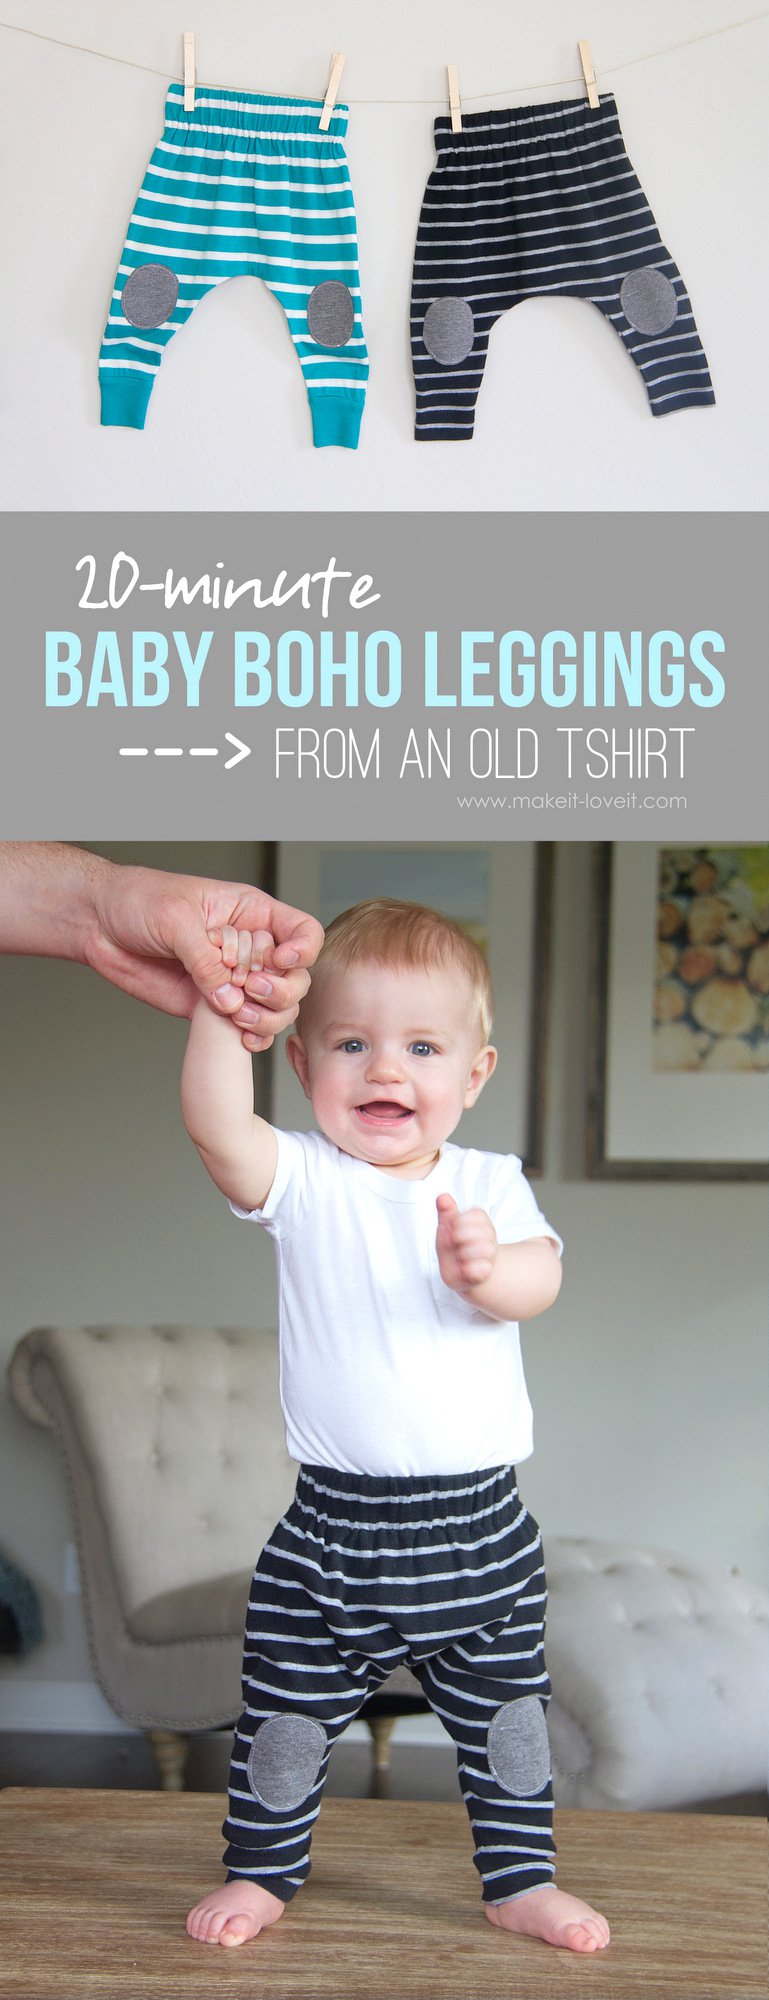 Simple-20-minute-Baby-Boho-Leggings-from-an-old-Tshirt-1